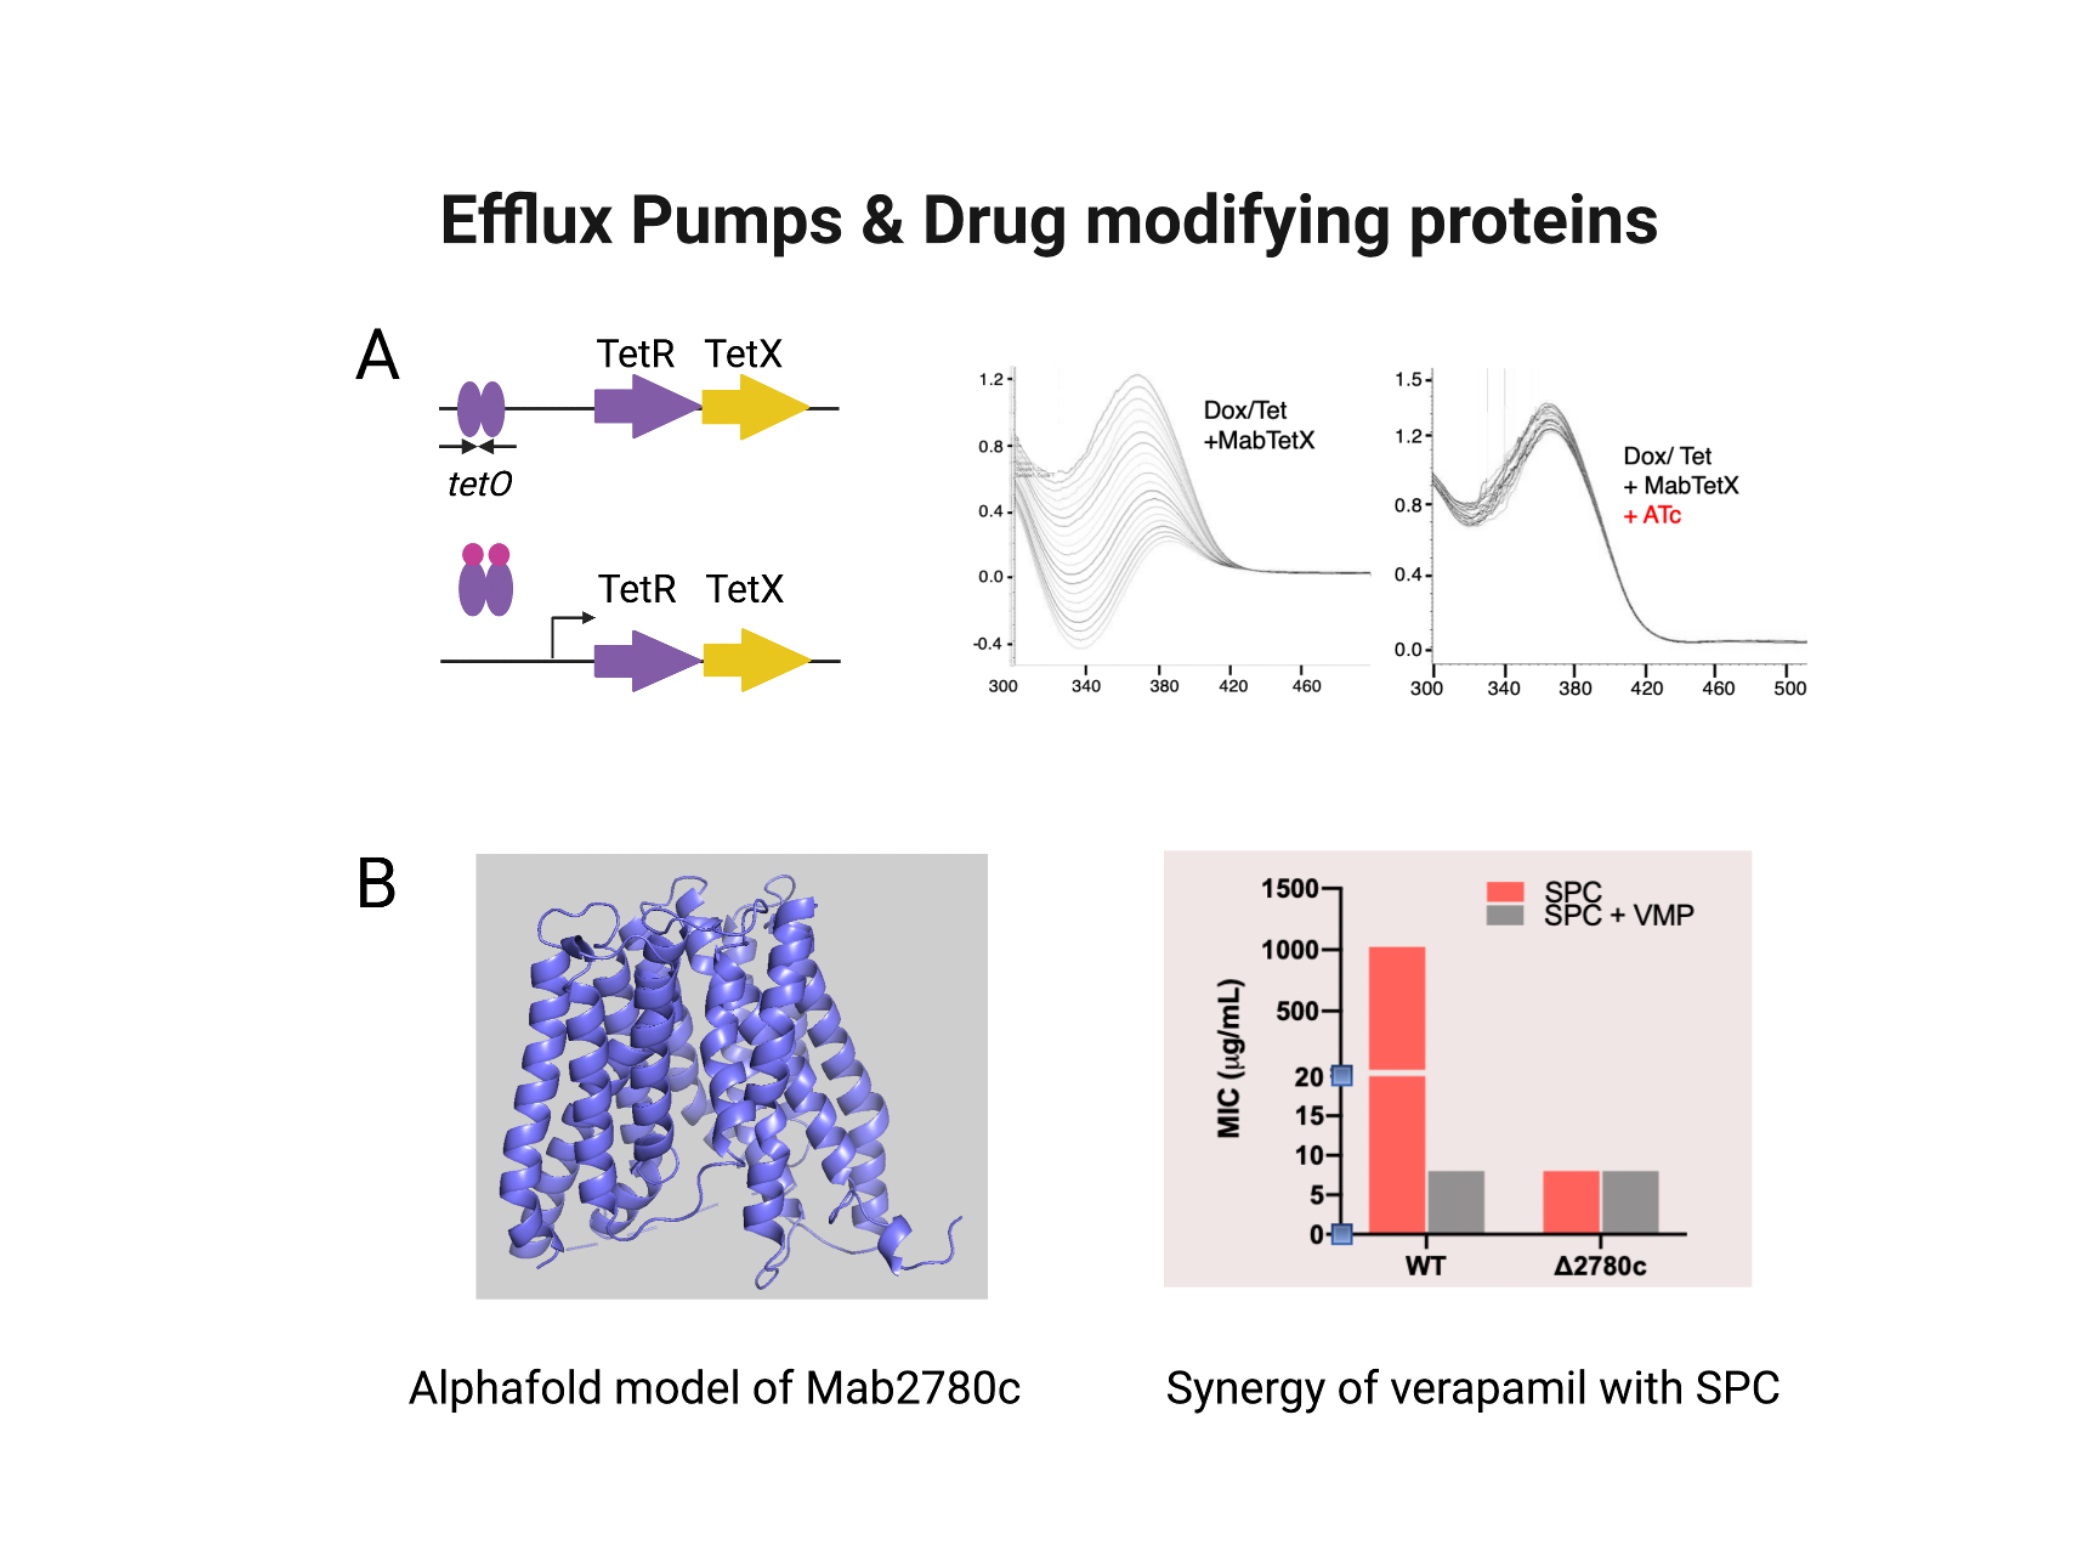 Efflux pumps and drug modifying proteins